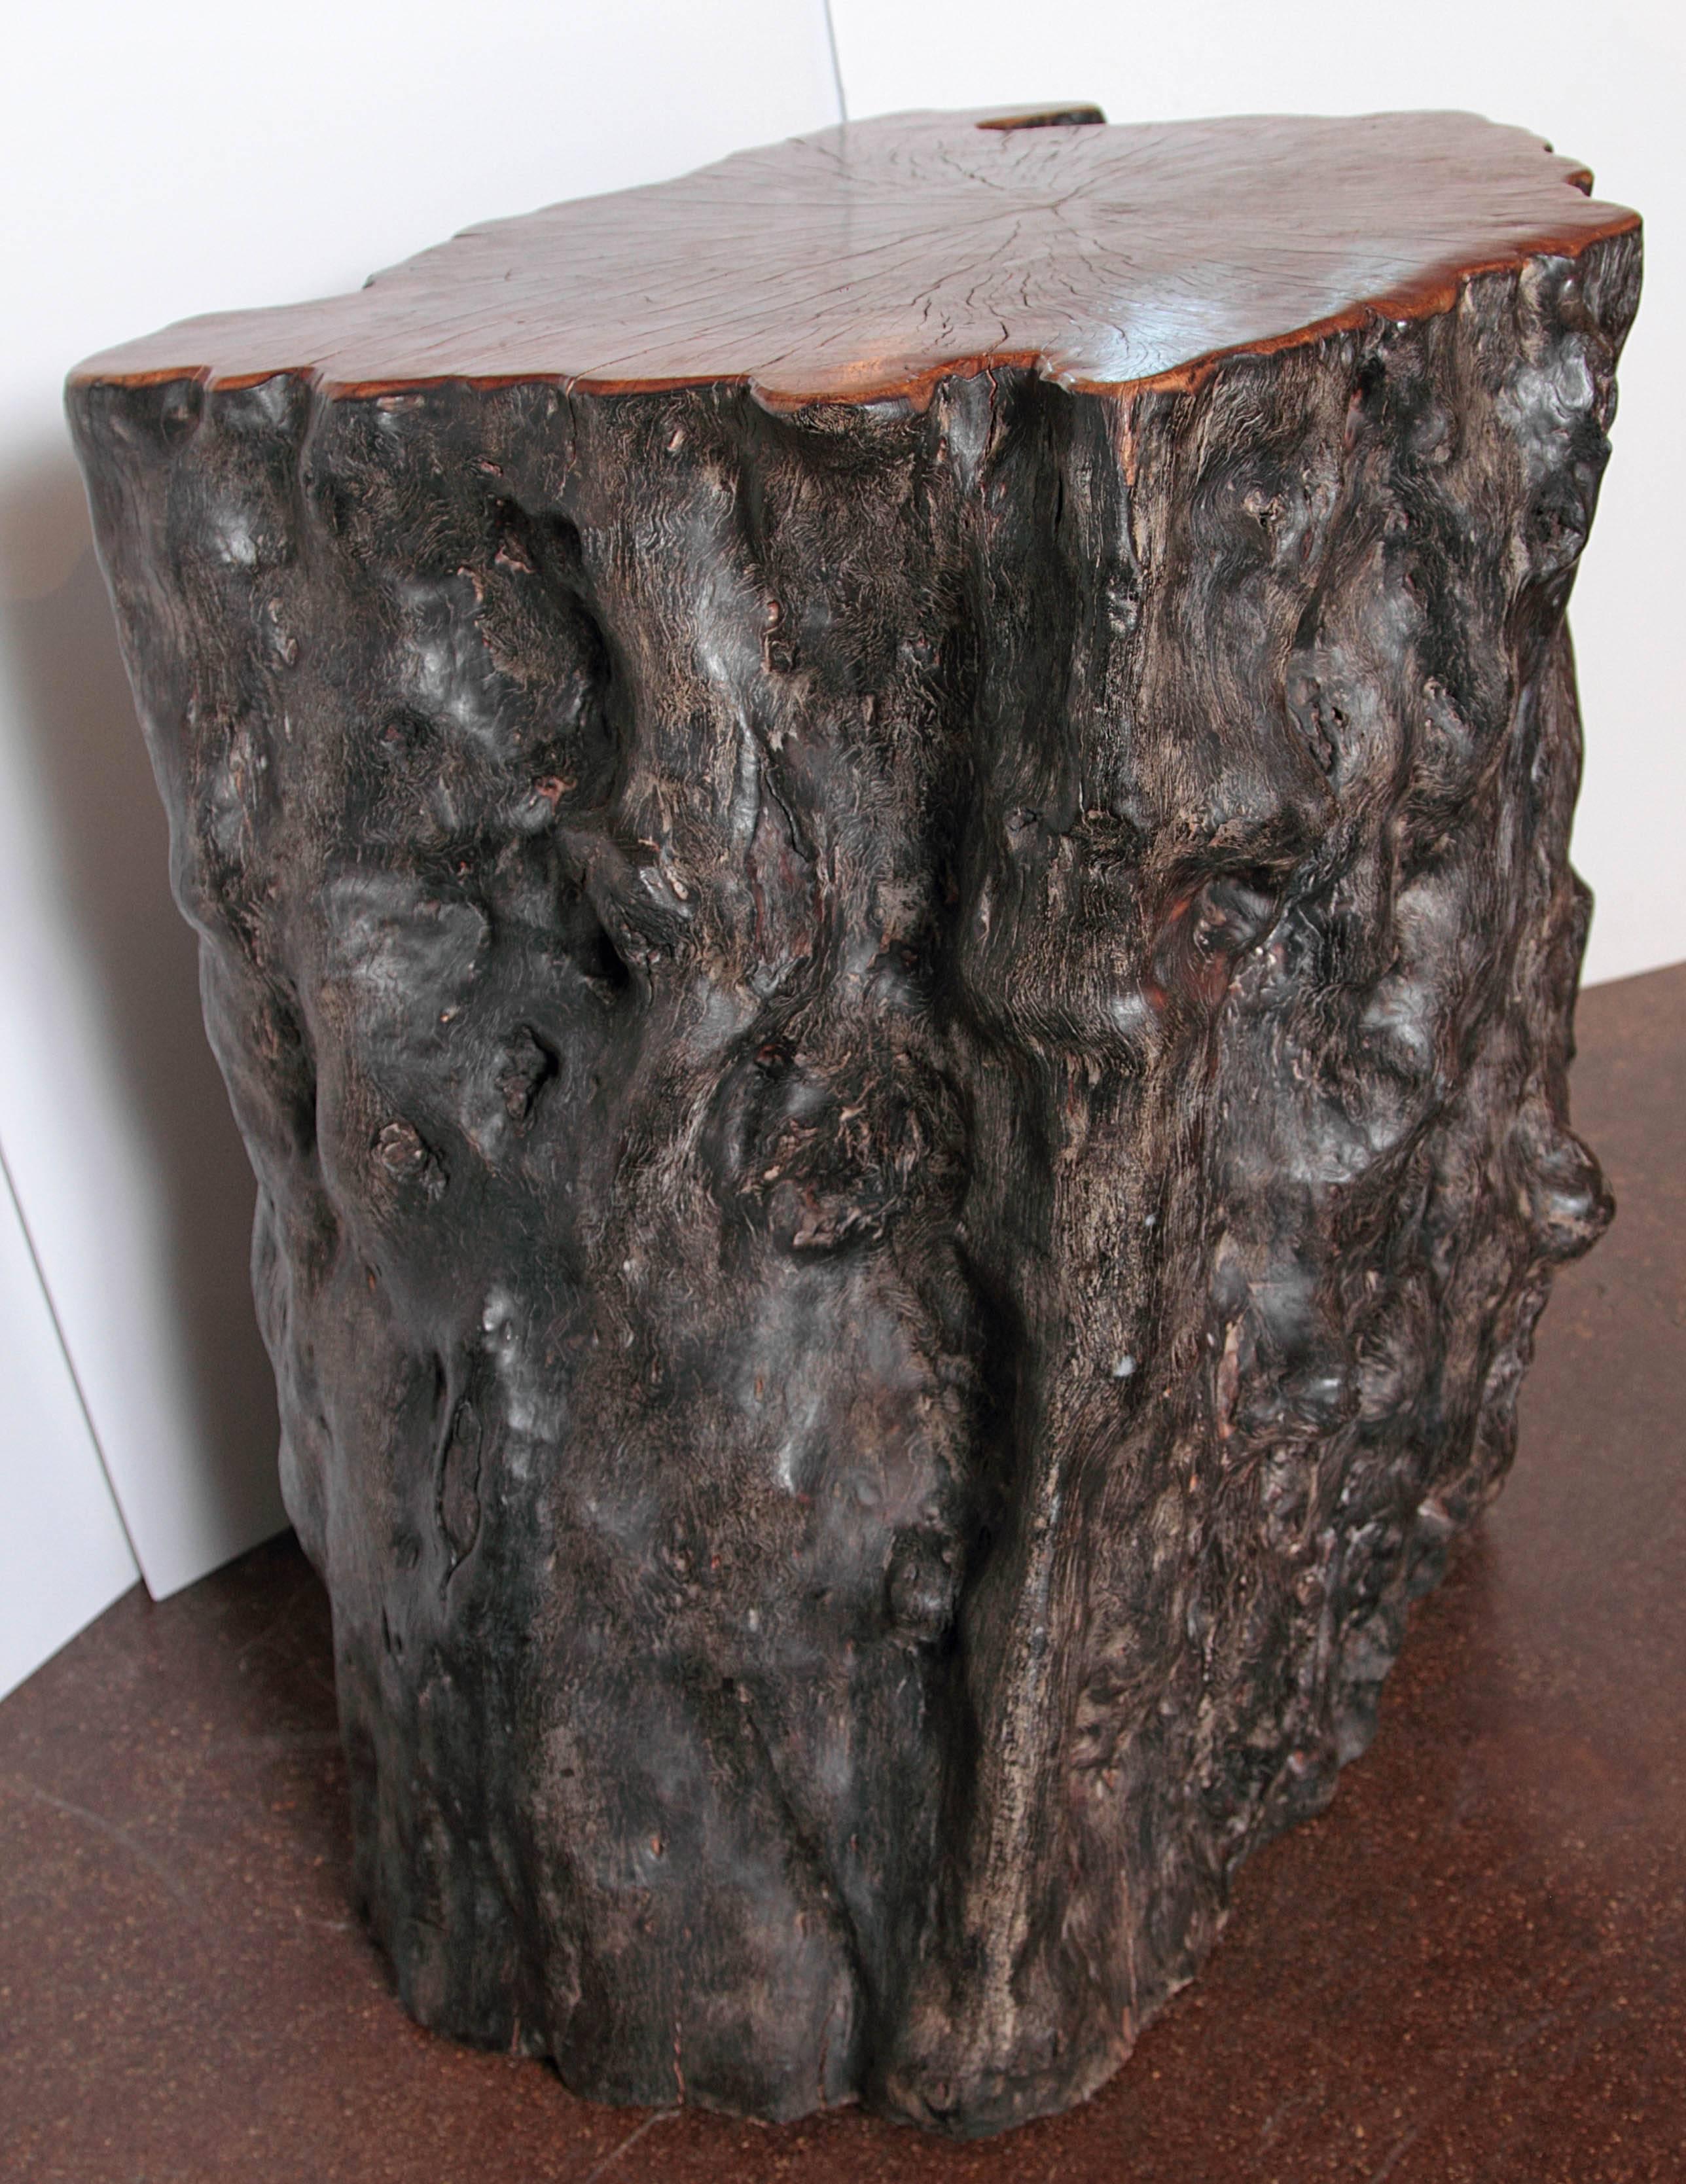 Organic lychee wood end table or table base.